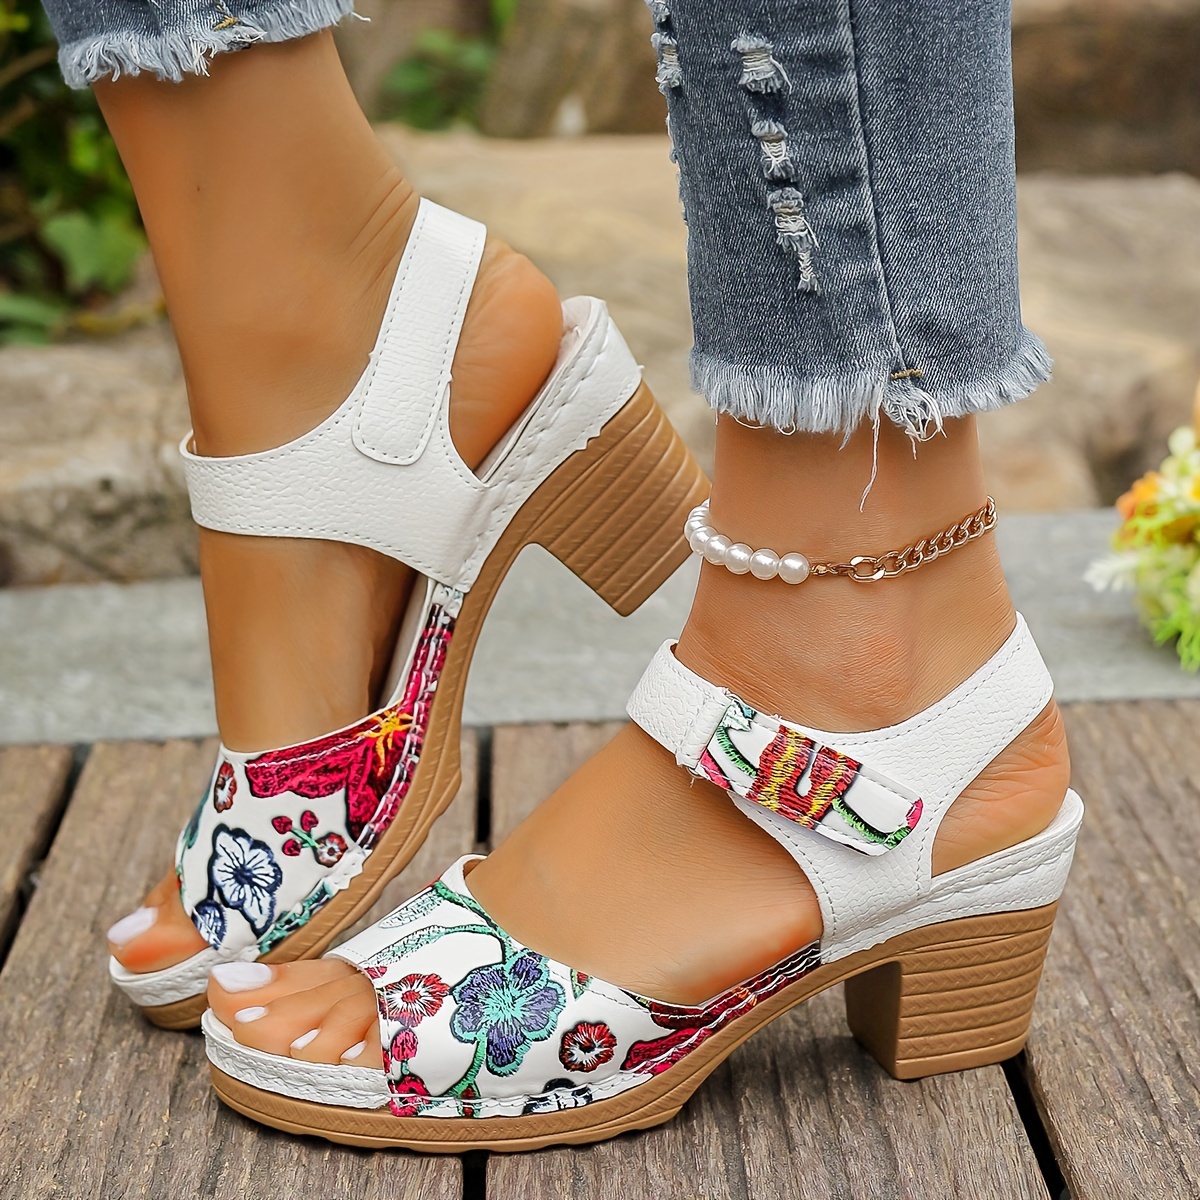 

Women's Fashion Floral Print High-heel Sandals, Casual Style, Versatile Summer Shoes With Chunky Heel